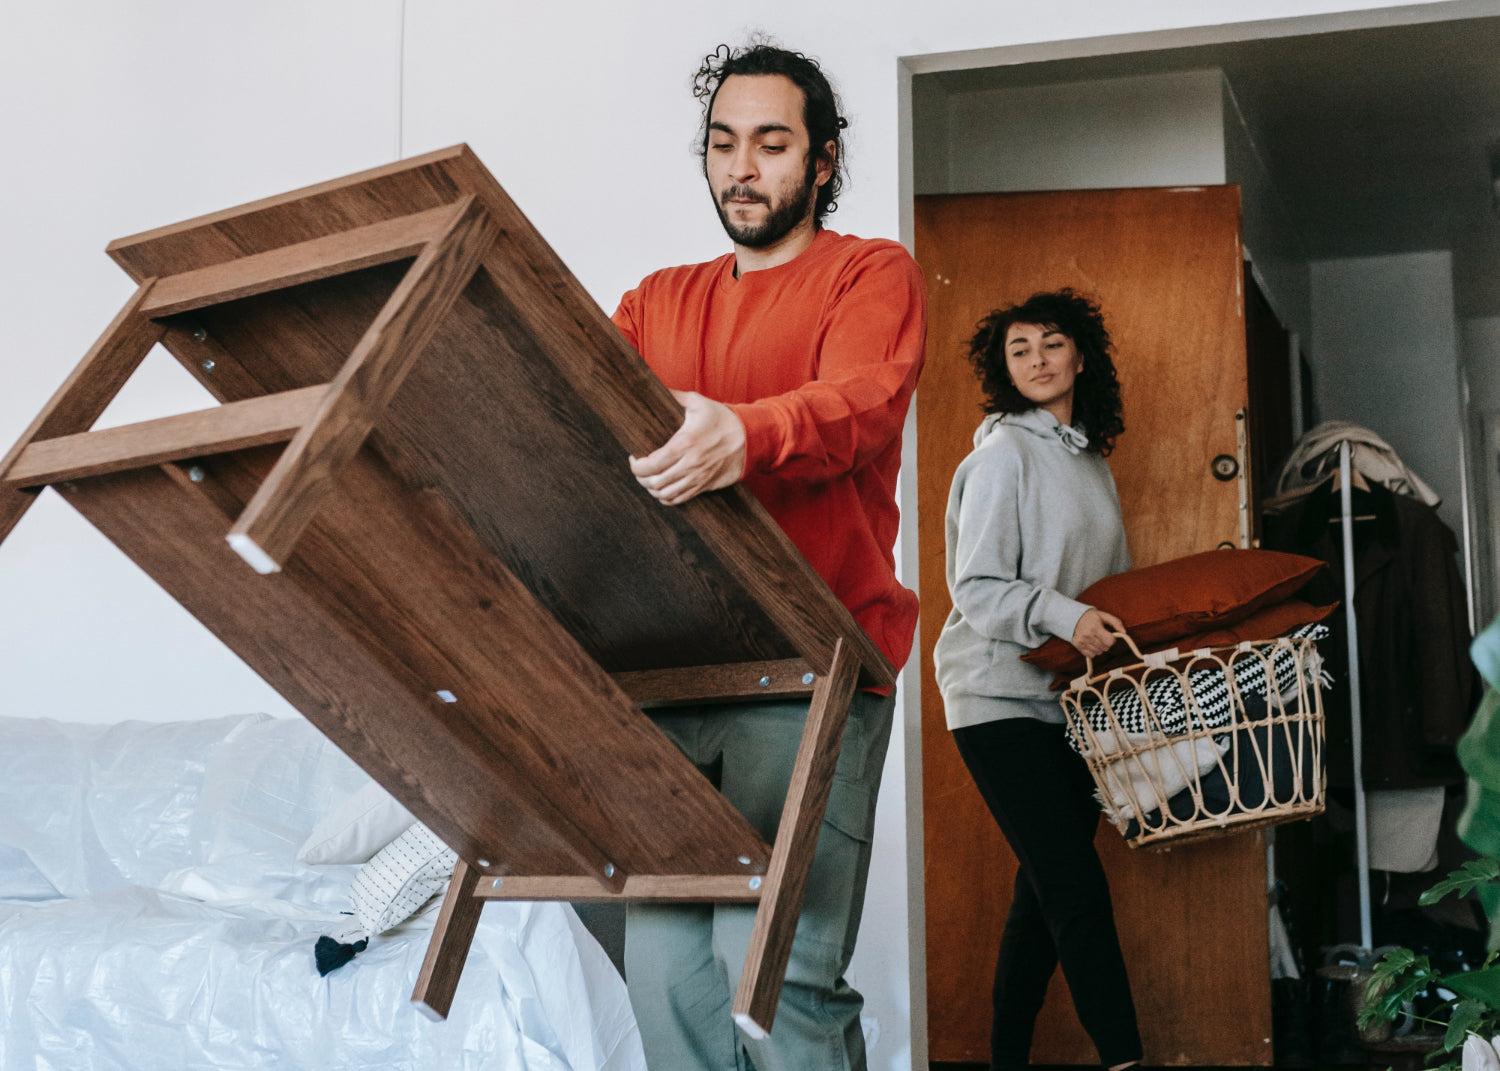 Two people move furniture in a home